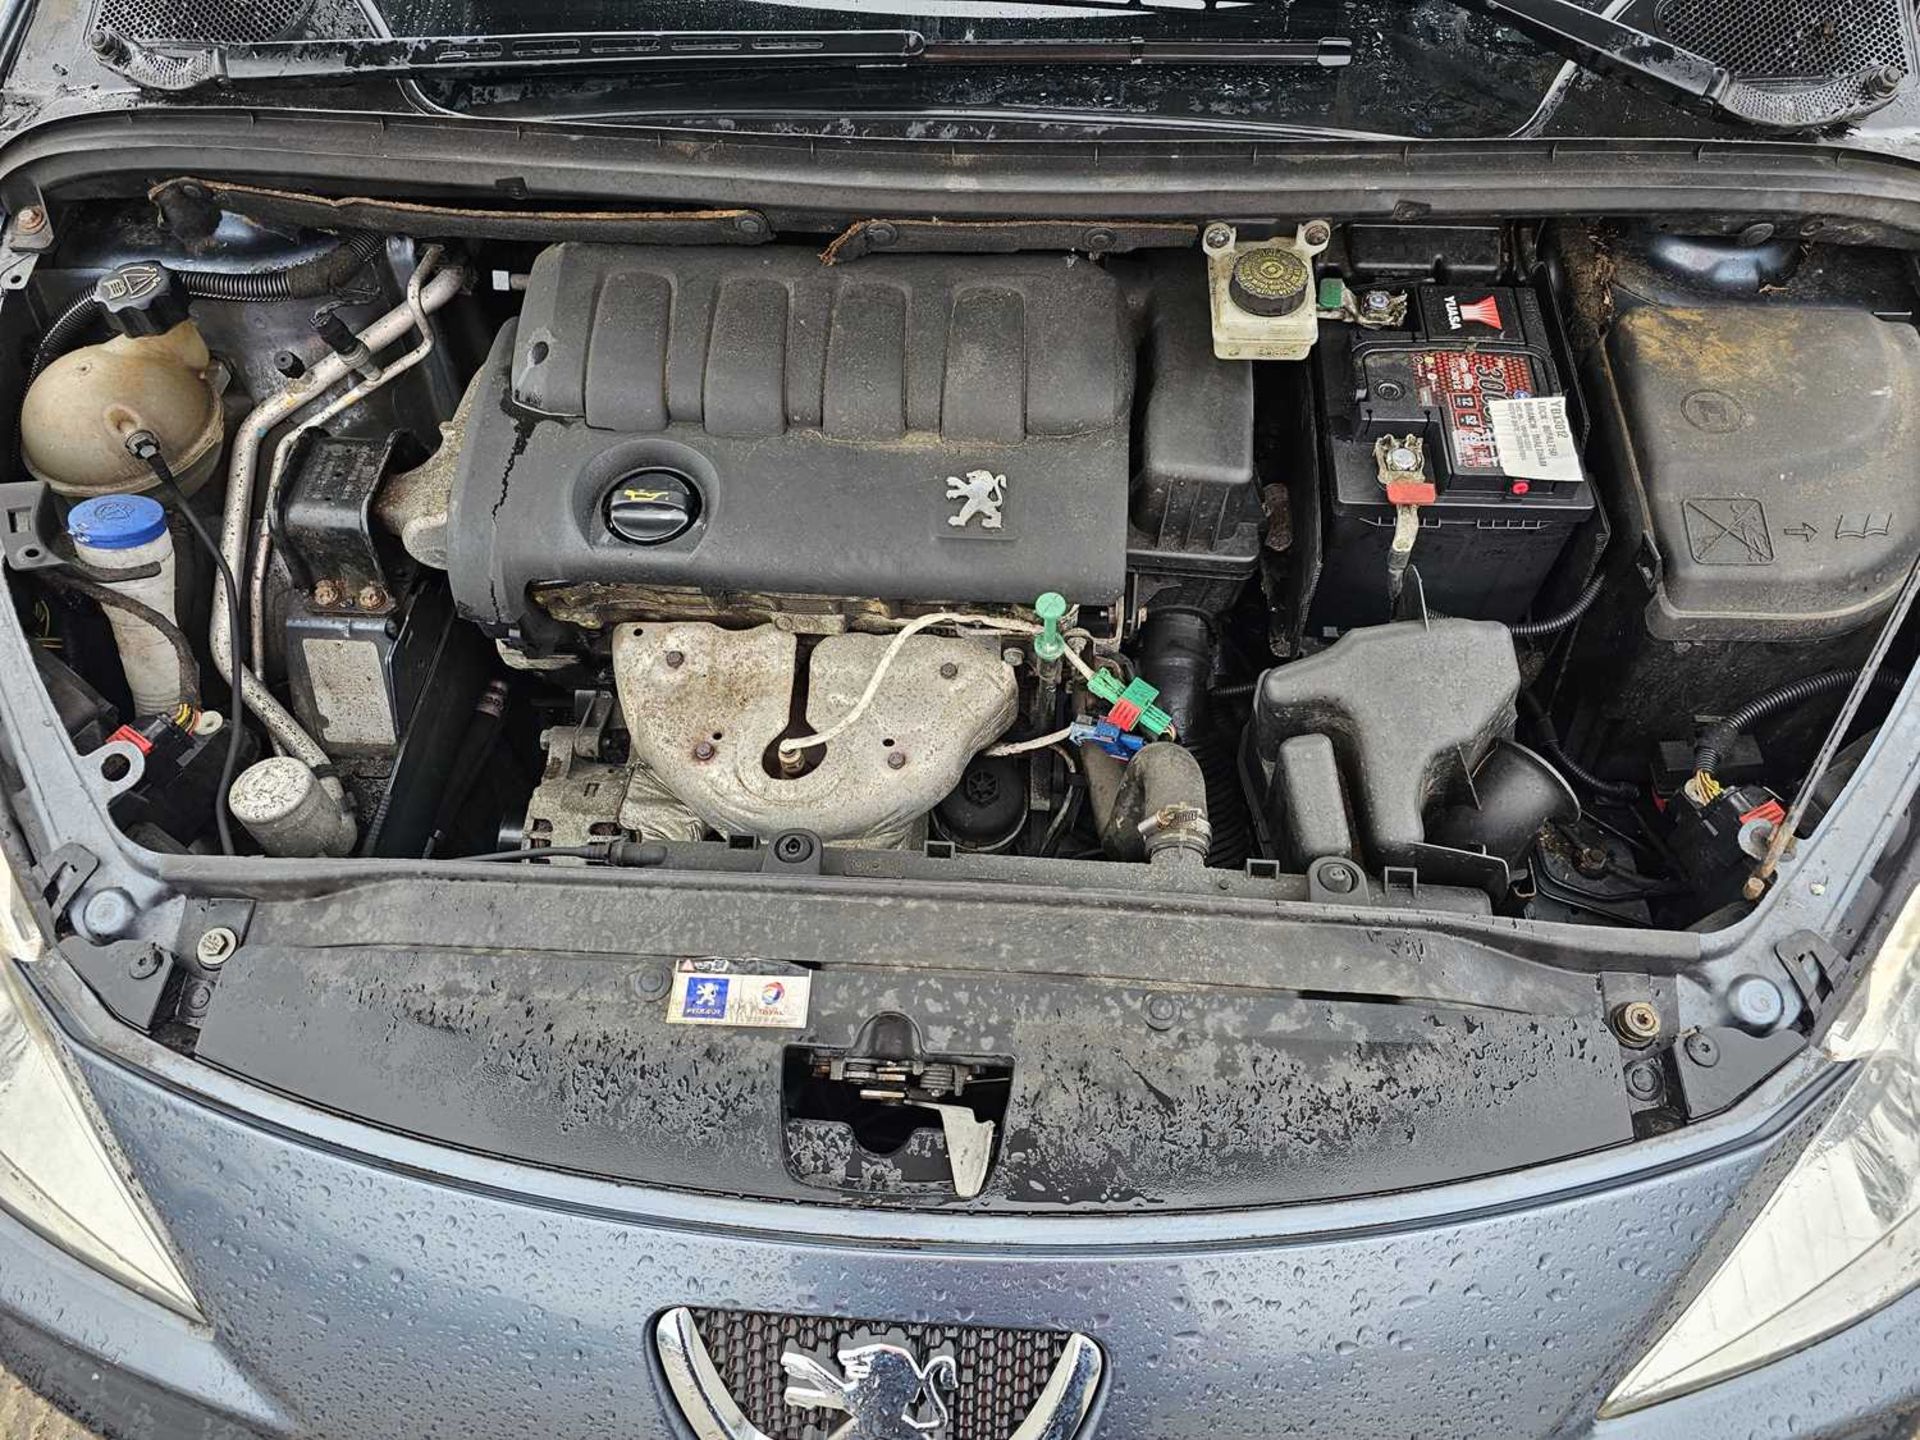 2007 Peugeot 307 X-line, 5 Speed, A/C (Reg. Docs. Available, Tested 11/24) - Image 17 of 28